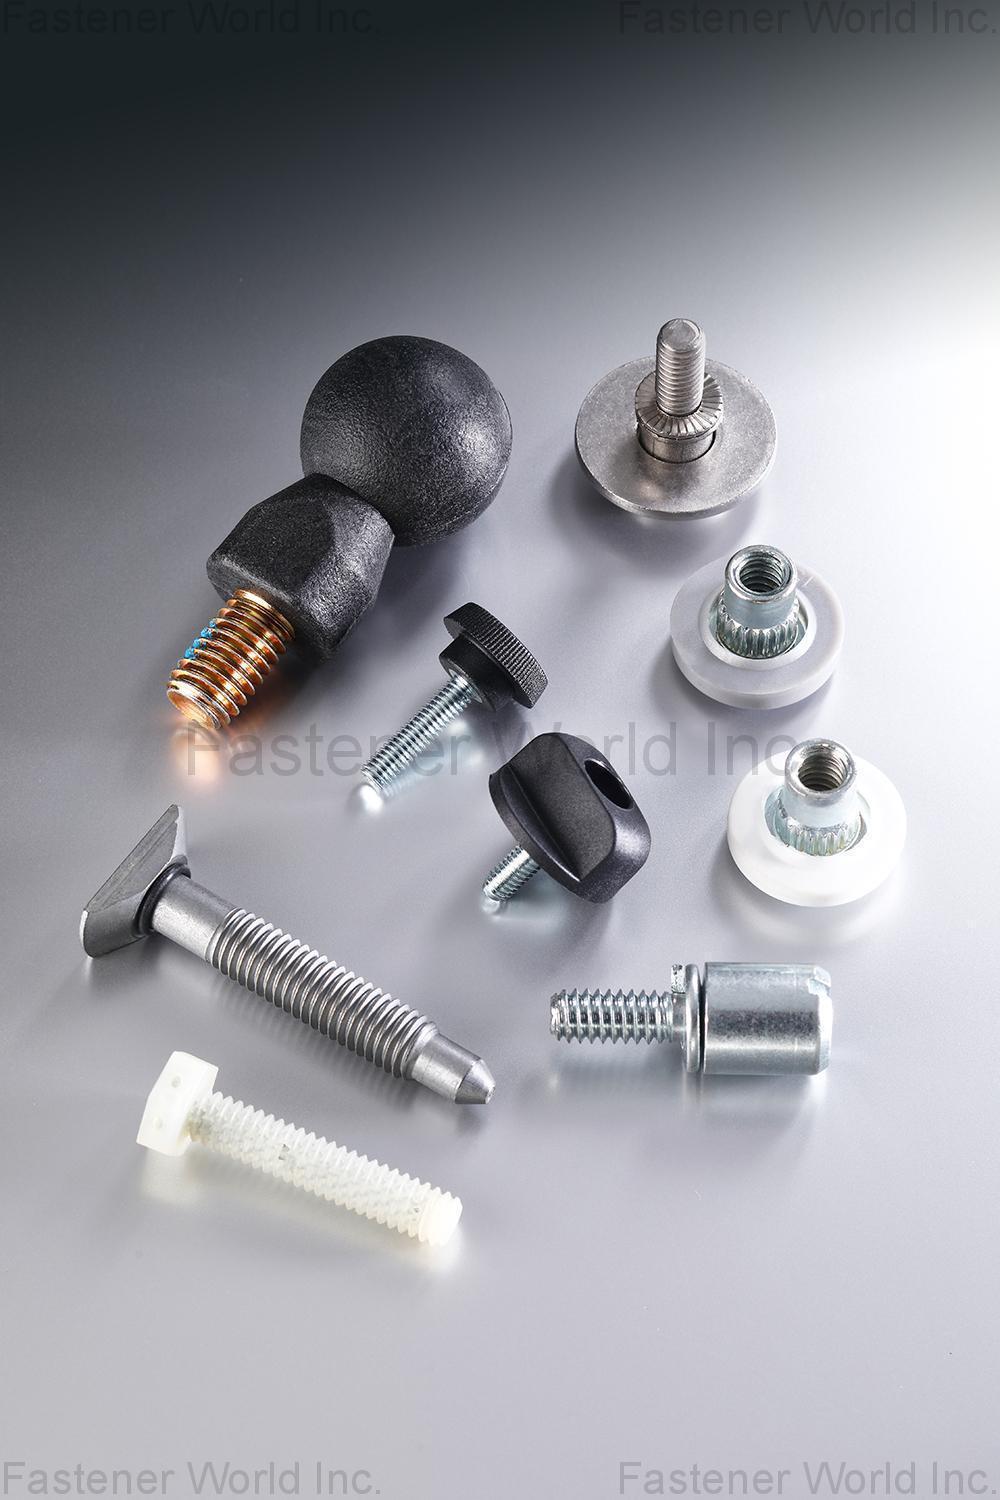 VERTEX PRECISION INDUSTRIAL CORP. , ASSEMBLY COMPONENTS